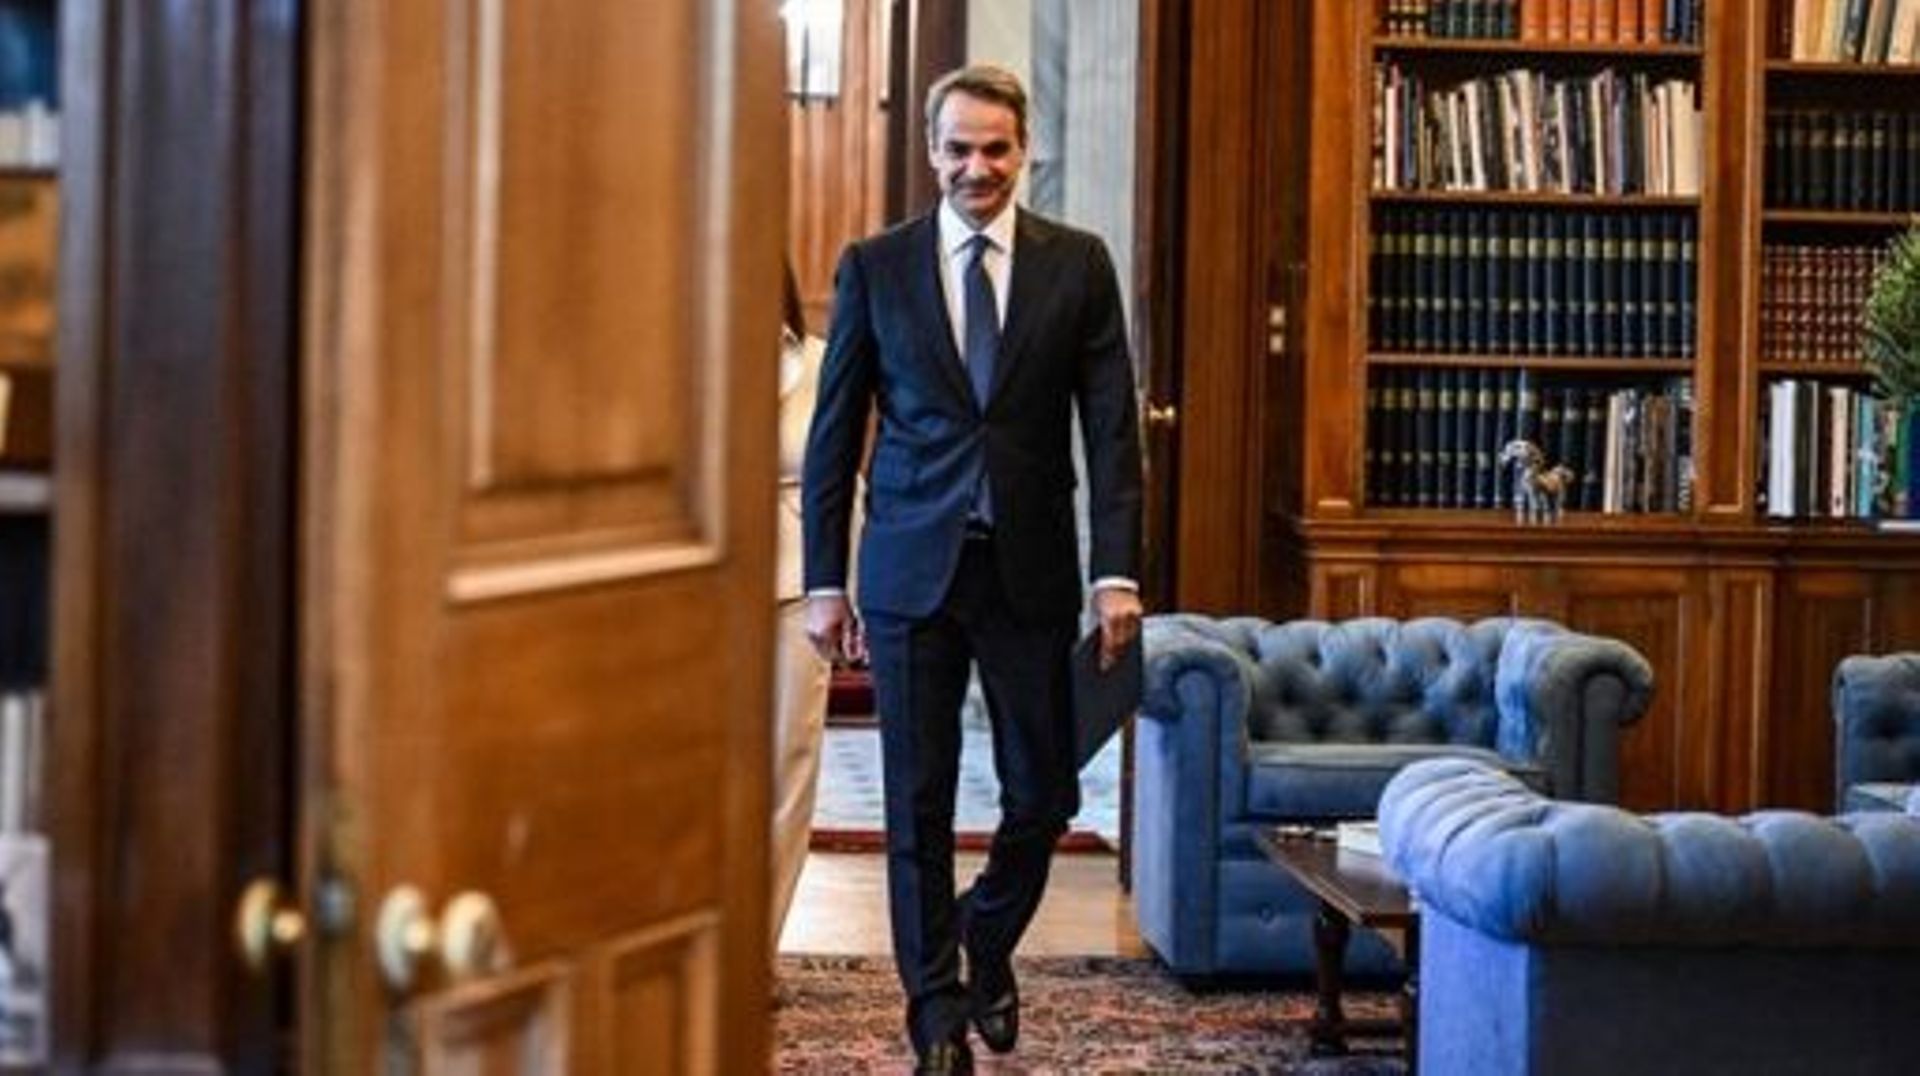 Greek Prime Minister Kyriakos Mitsotakis arrives at the office of the Greek President to announce the dissolution of the parliament in Athens on April, 2023. Greece's Prime Minister called for the dissolution of parliament on April 22, 2023, kicking off t